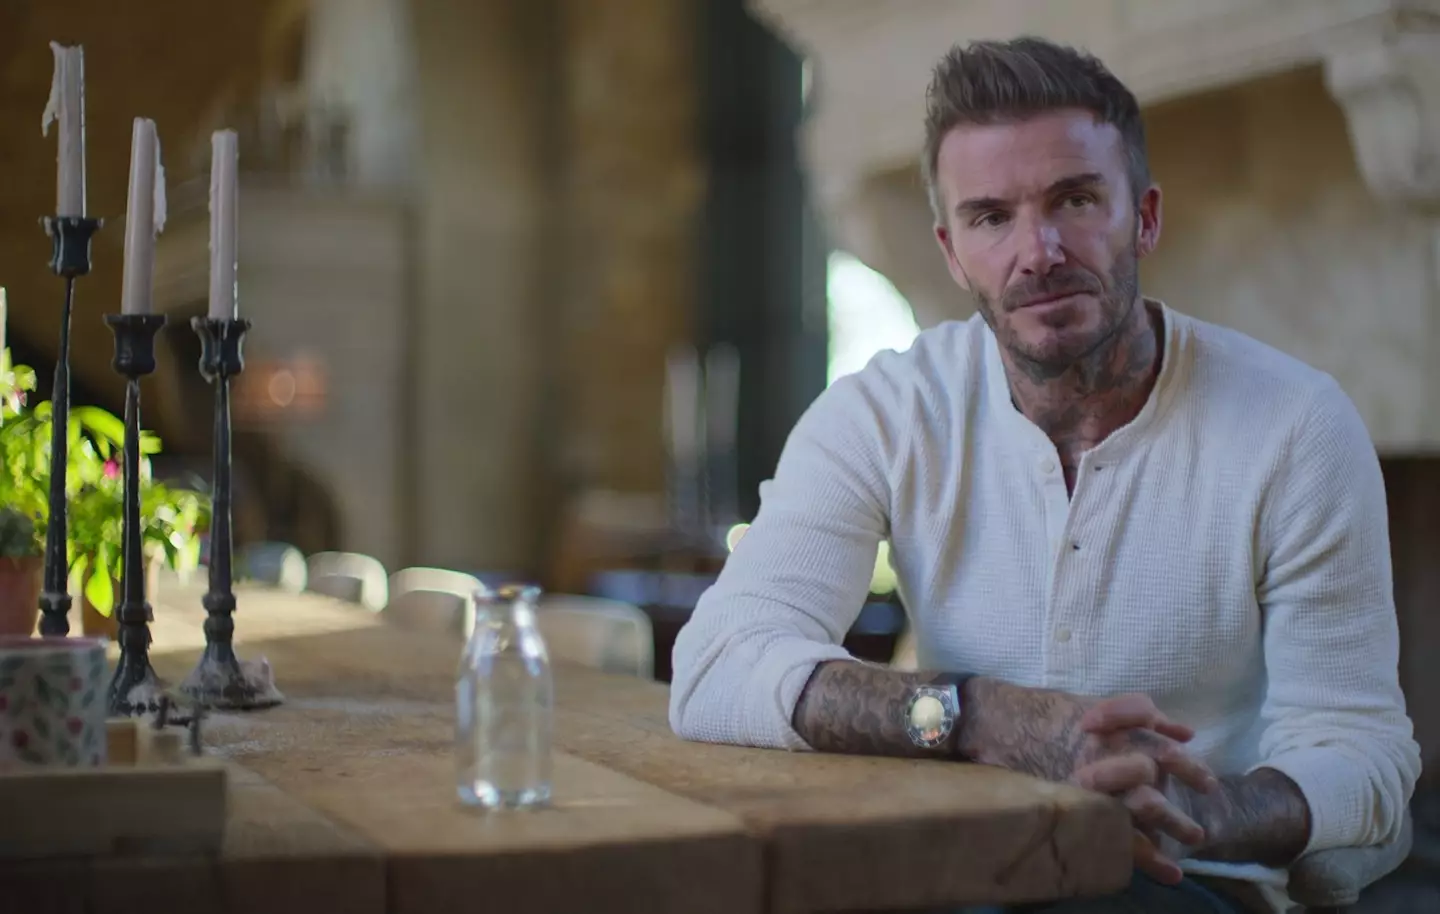 David Beckham opened up on his life and career for a Netflix series.